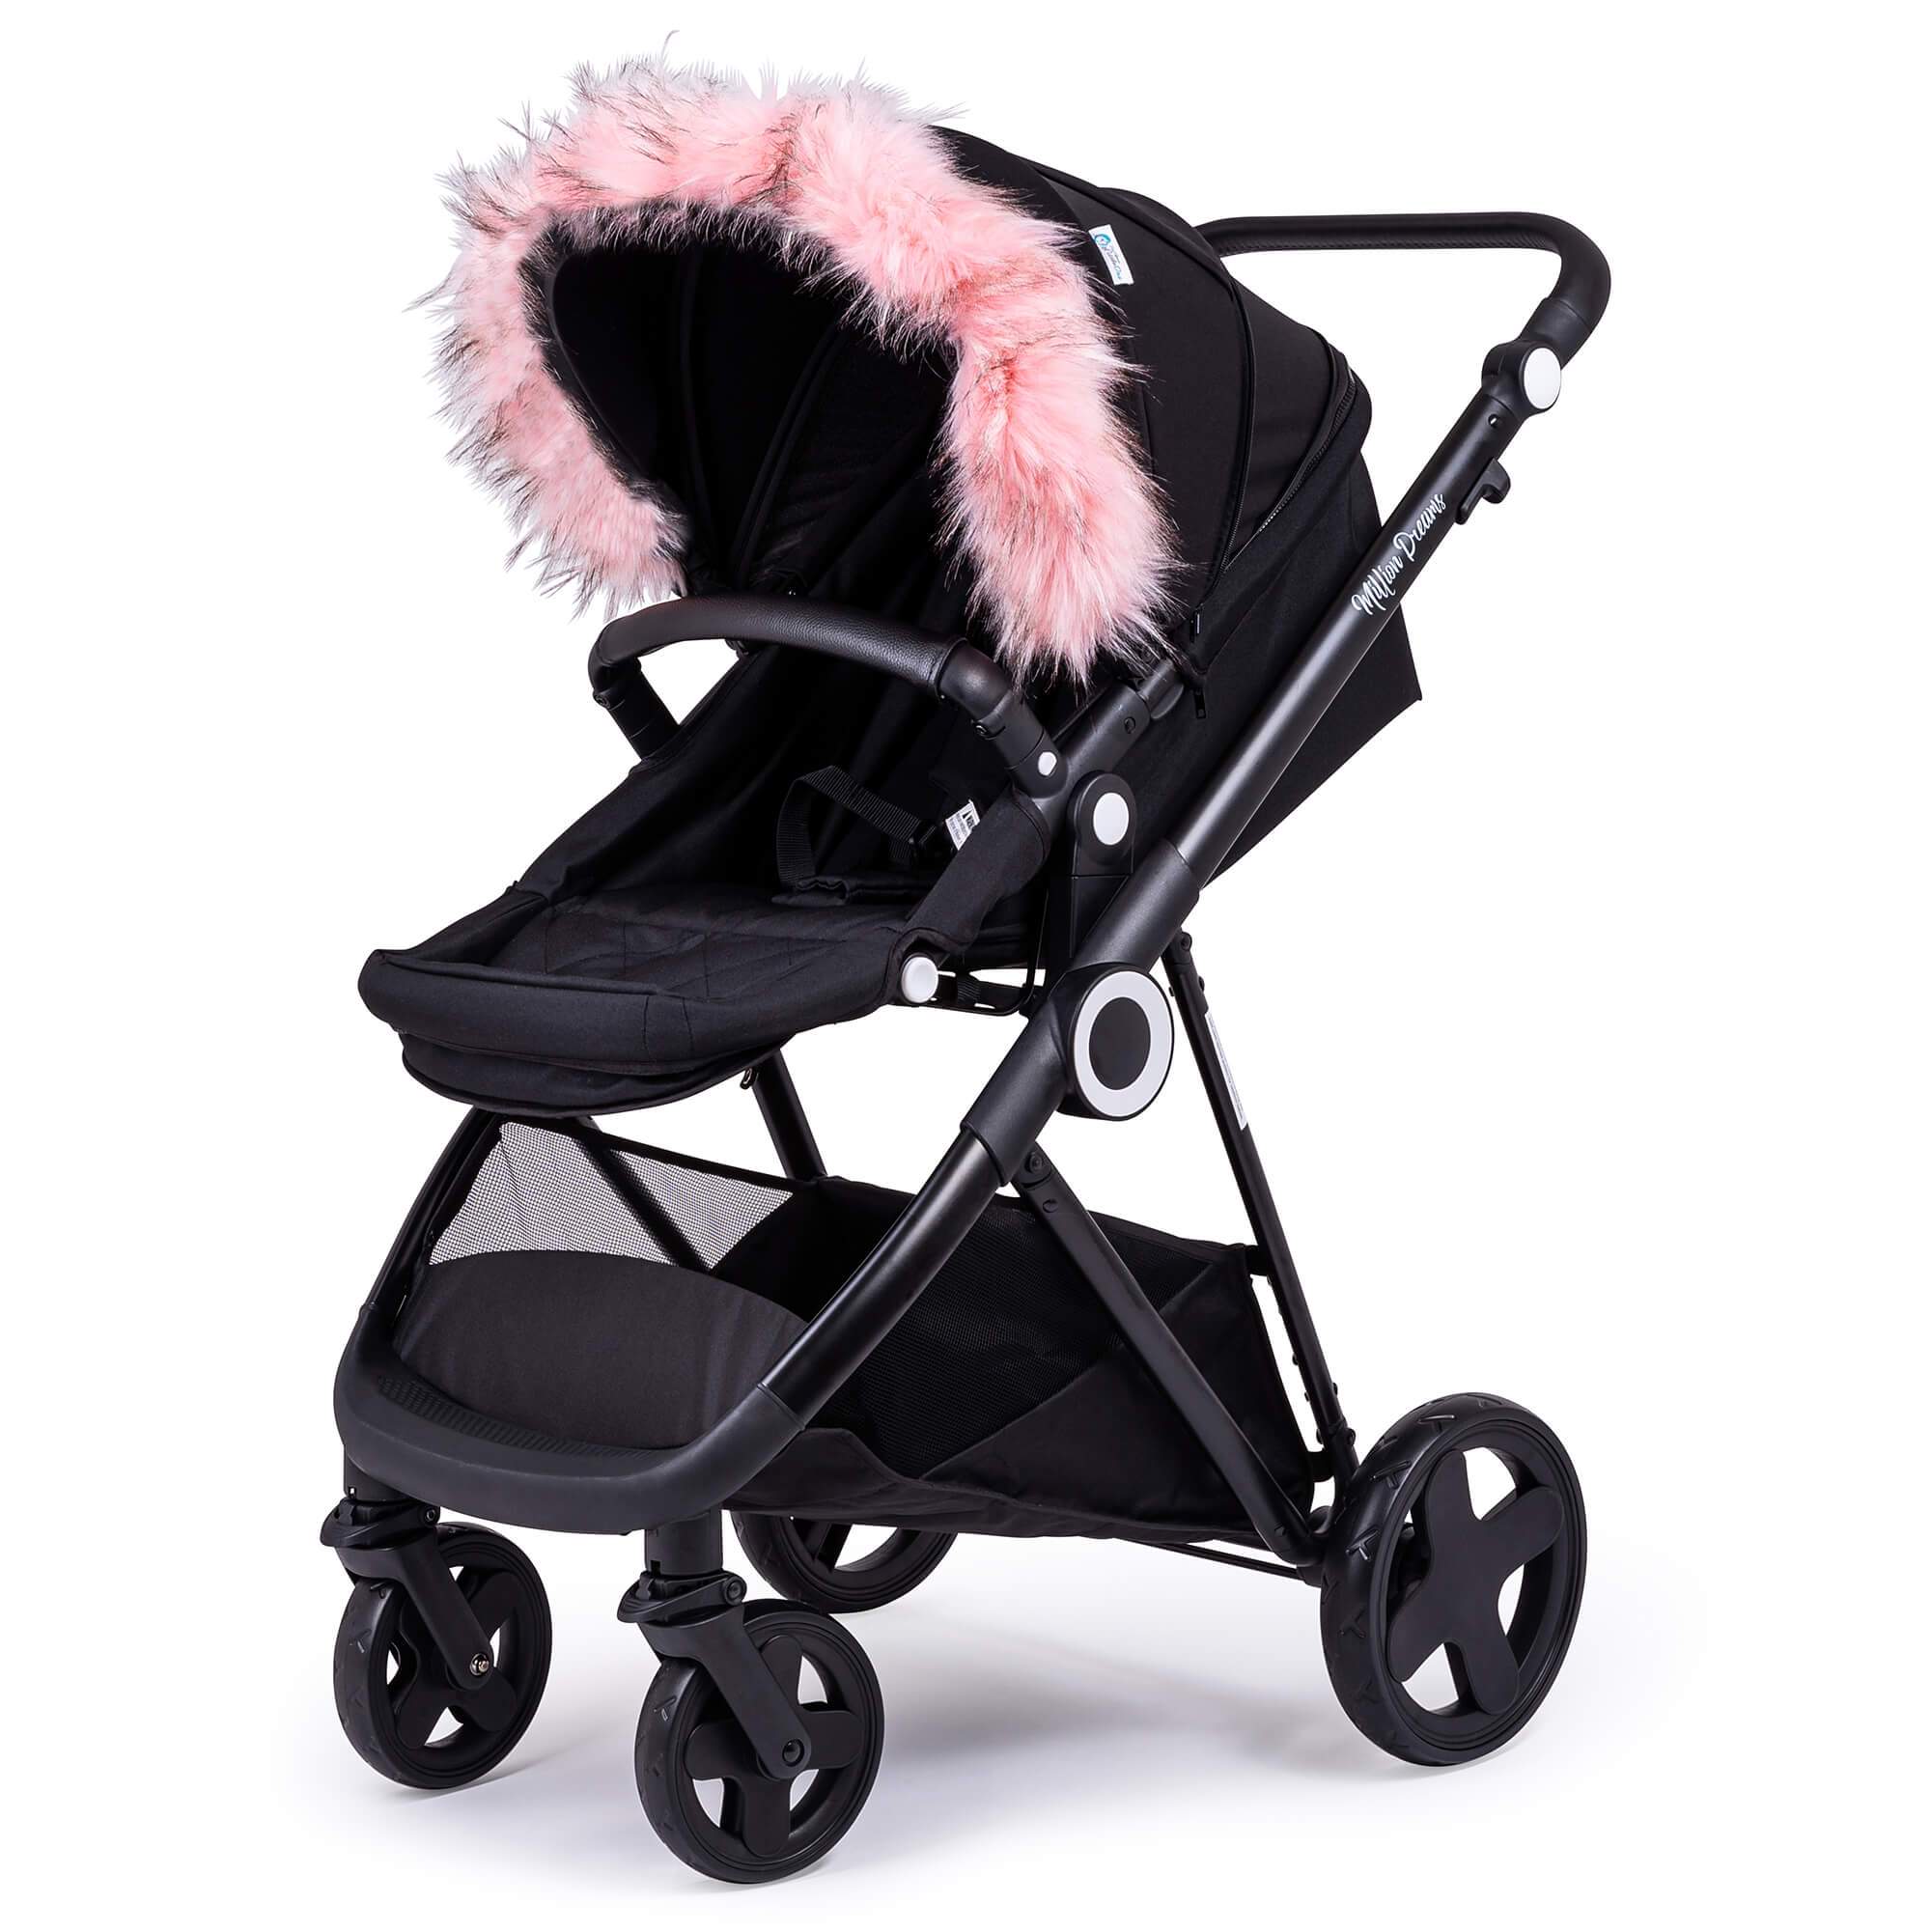 Pram Fur Hood Trim Attachment for Pushchair Compatible with Bebe 9 - Light Pink / Fits All Models | For Your Little One